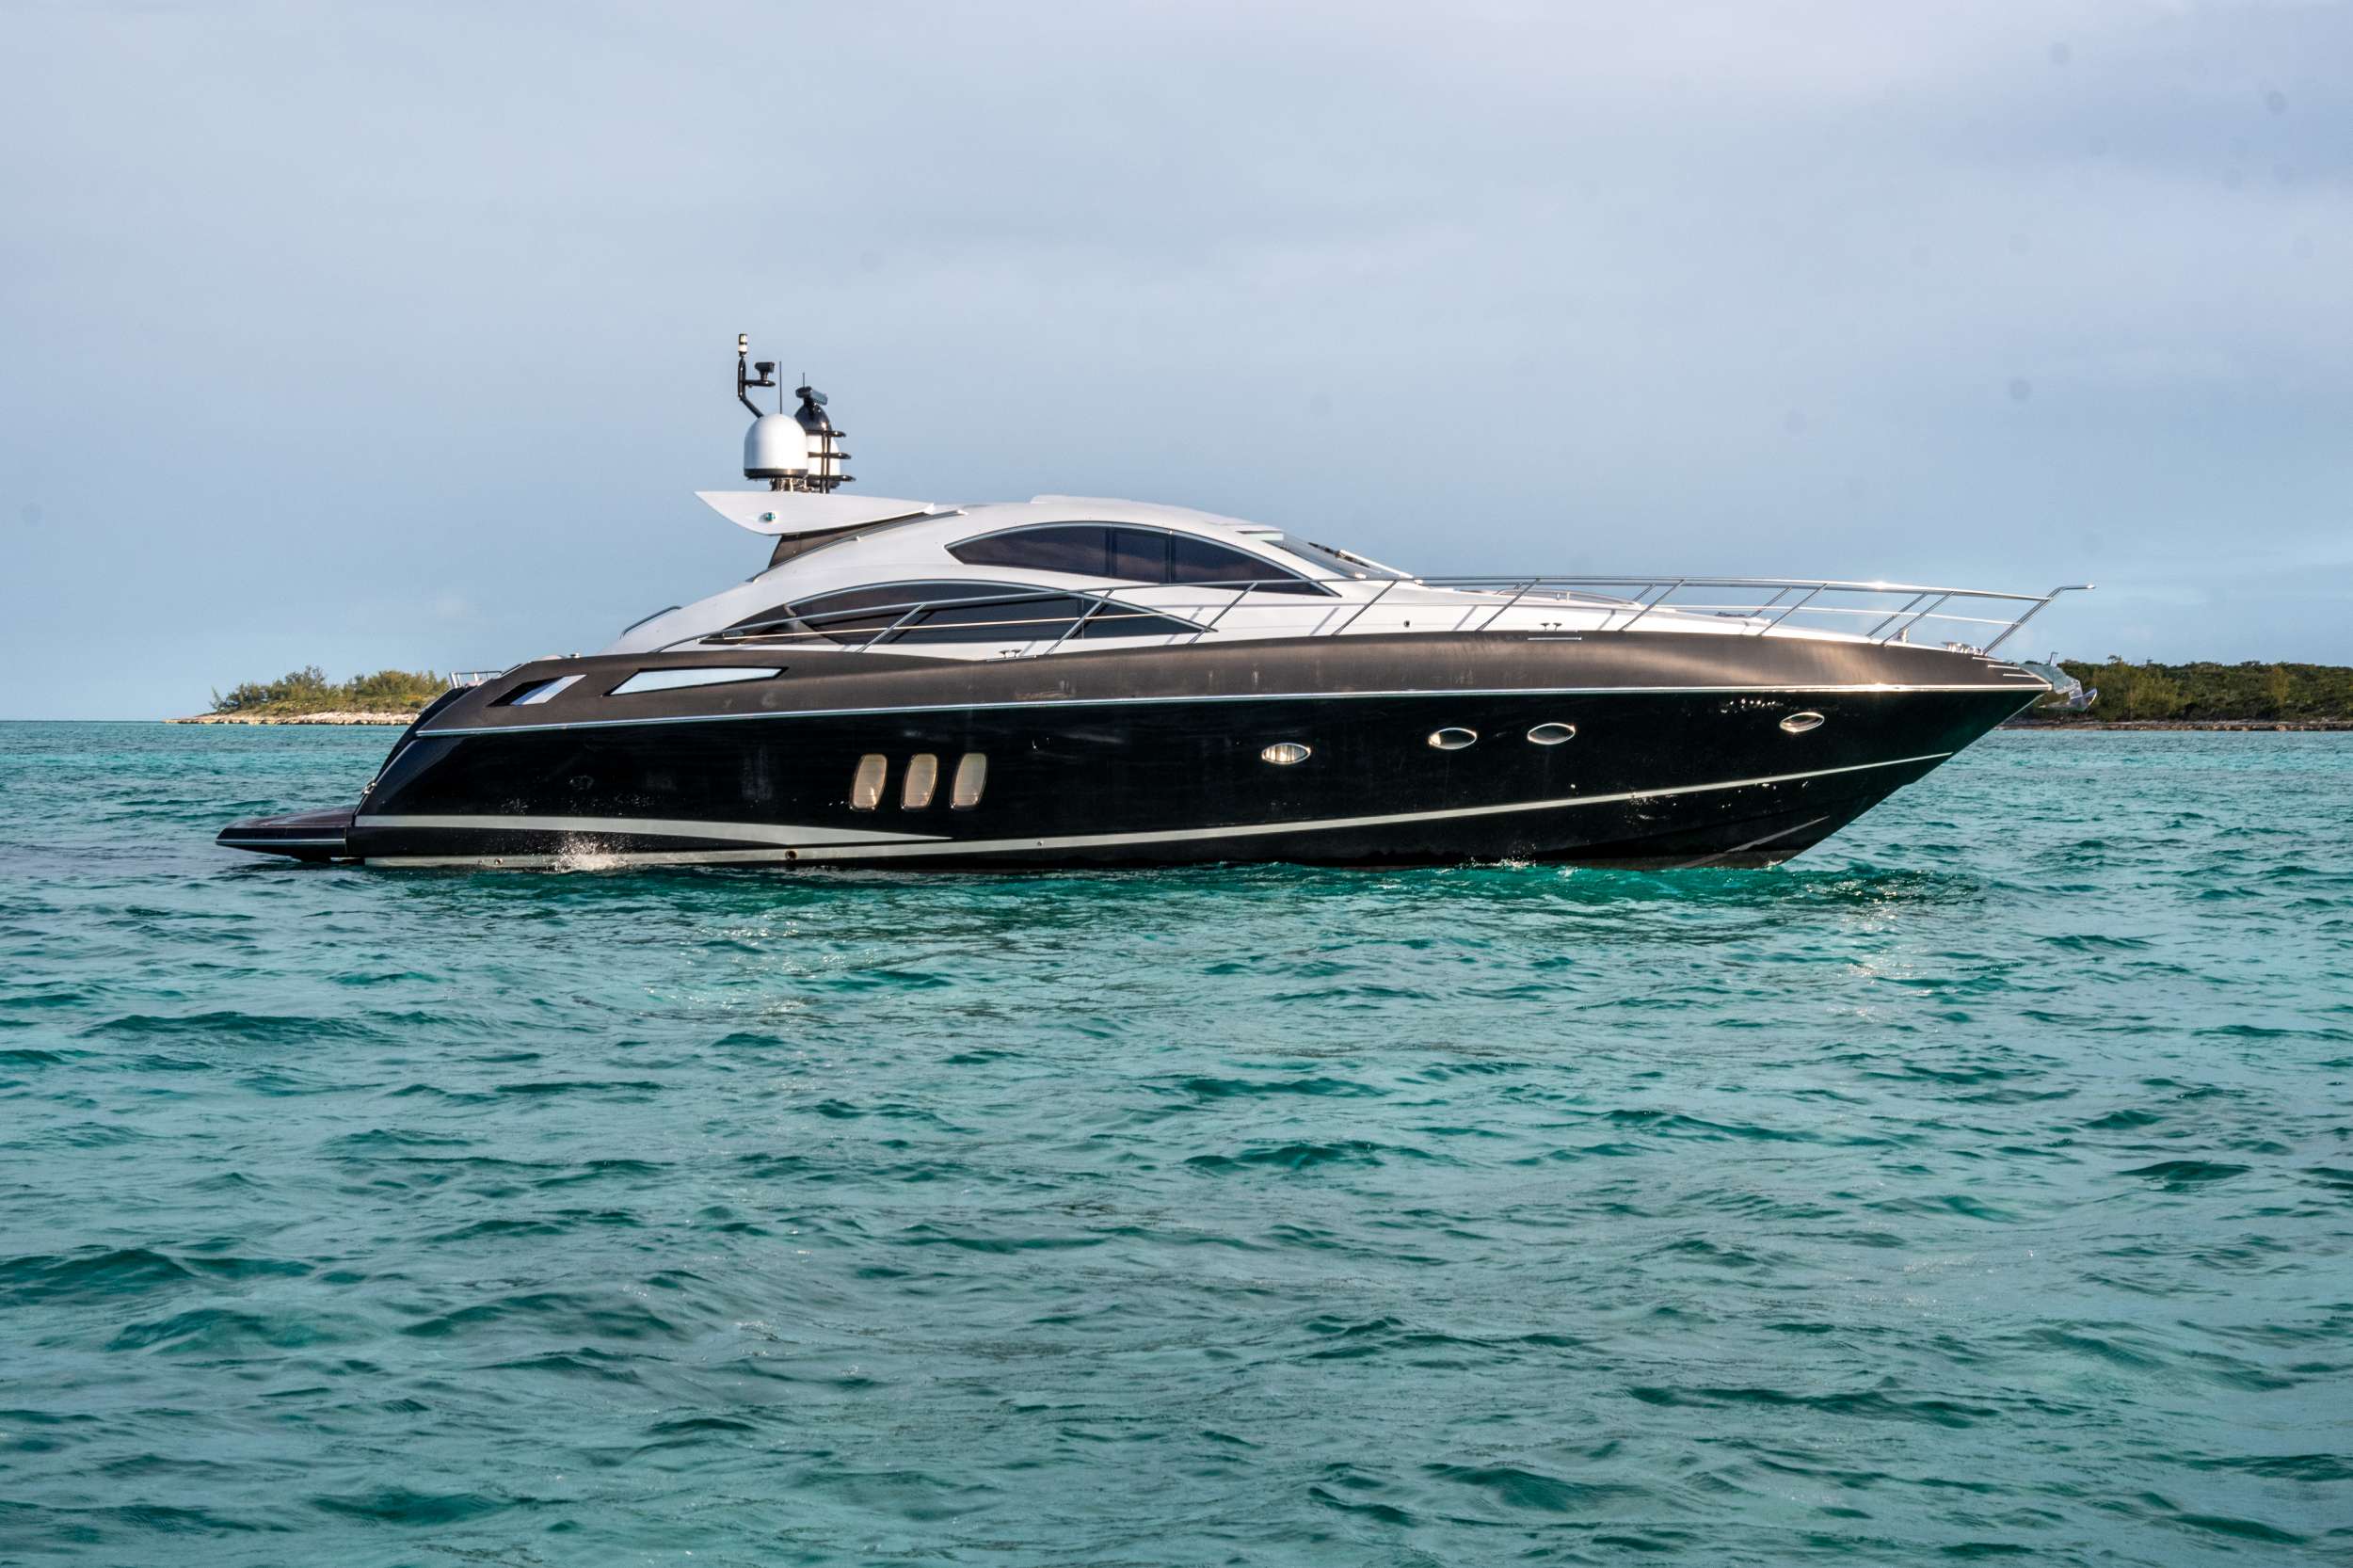 Yacht Flight risk is a modern, fast, comfortable yacht based in the Bahamas year round, she is available for short term and long term charters from 4 hours.

Day charters up to 10 Guests and overnight 4 guests in 2 cabins

She is able to do the Exumas and back in a day